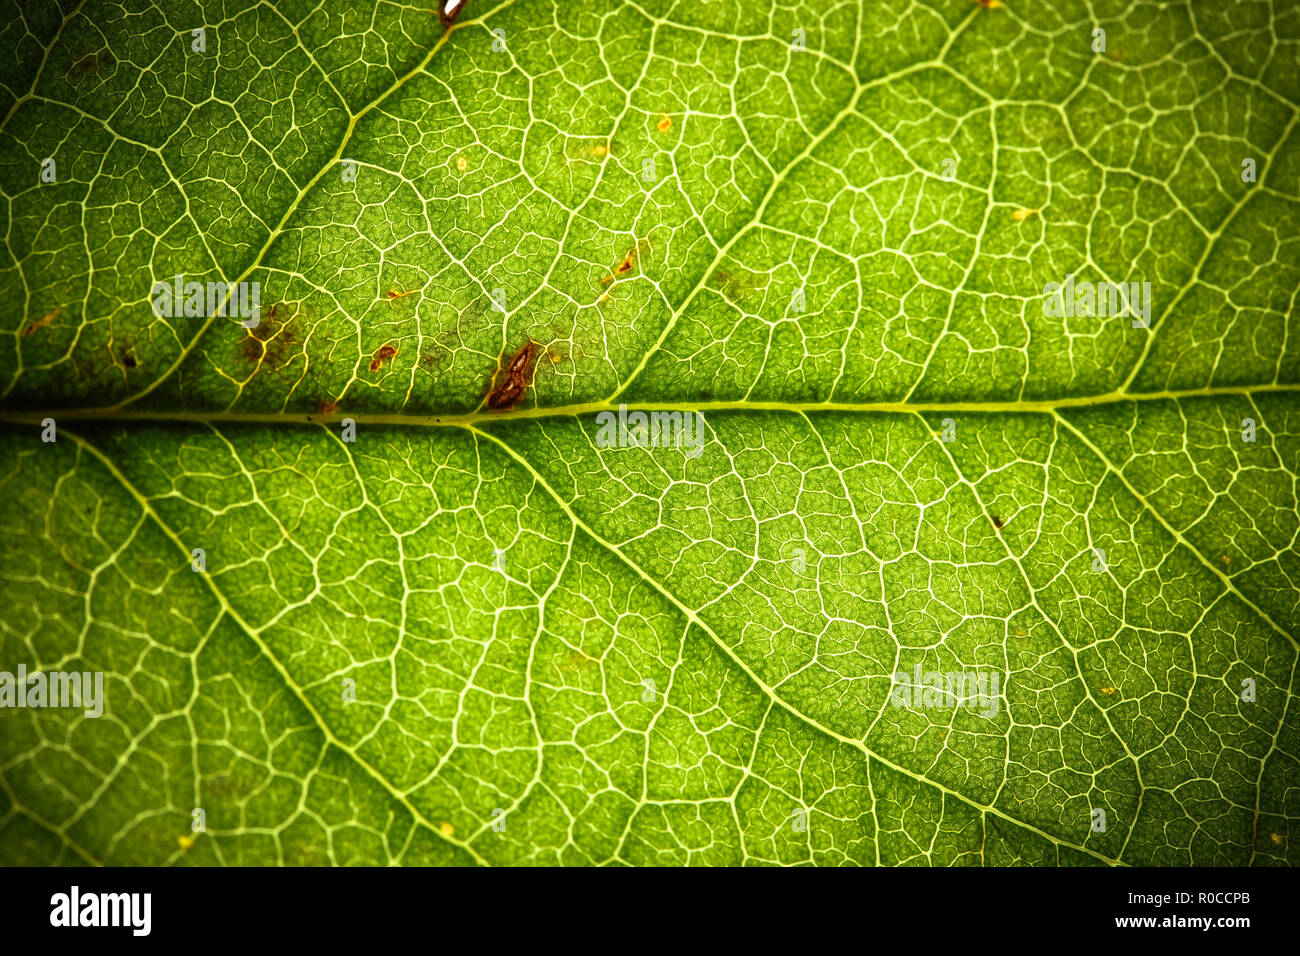 Natural green leaf fresh detailed rugged surface structure extreme macro  closeup photo with midrib and visible leaf veins and grooves as a nature  text Stock Photo - Alamy